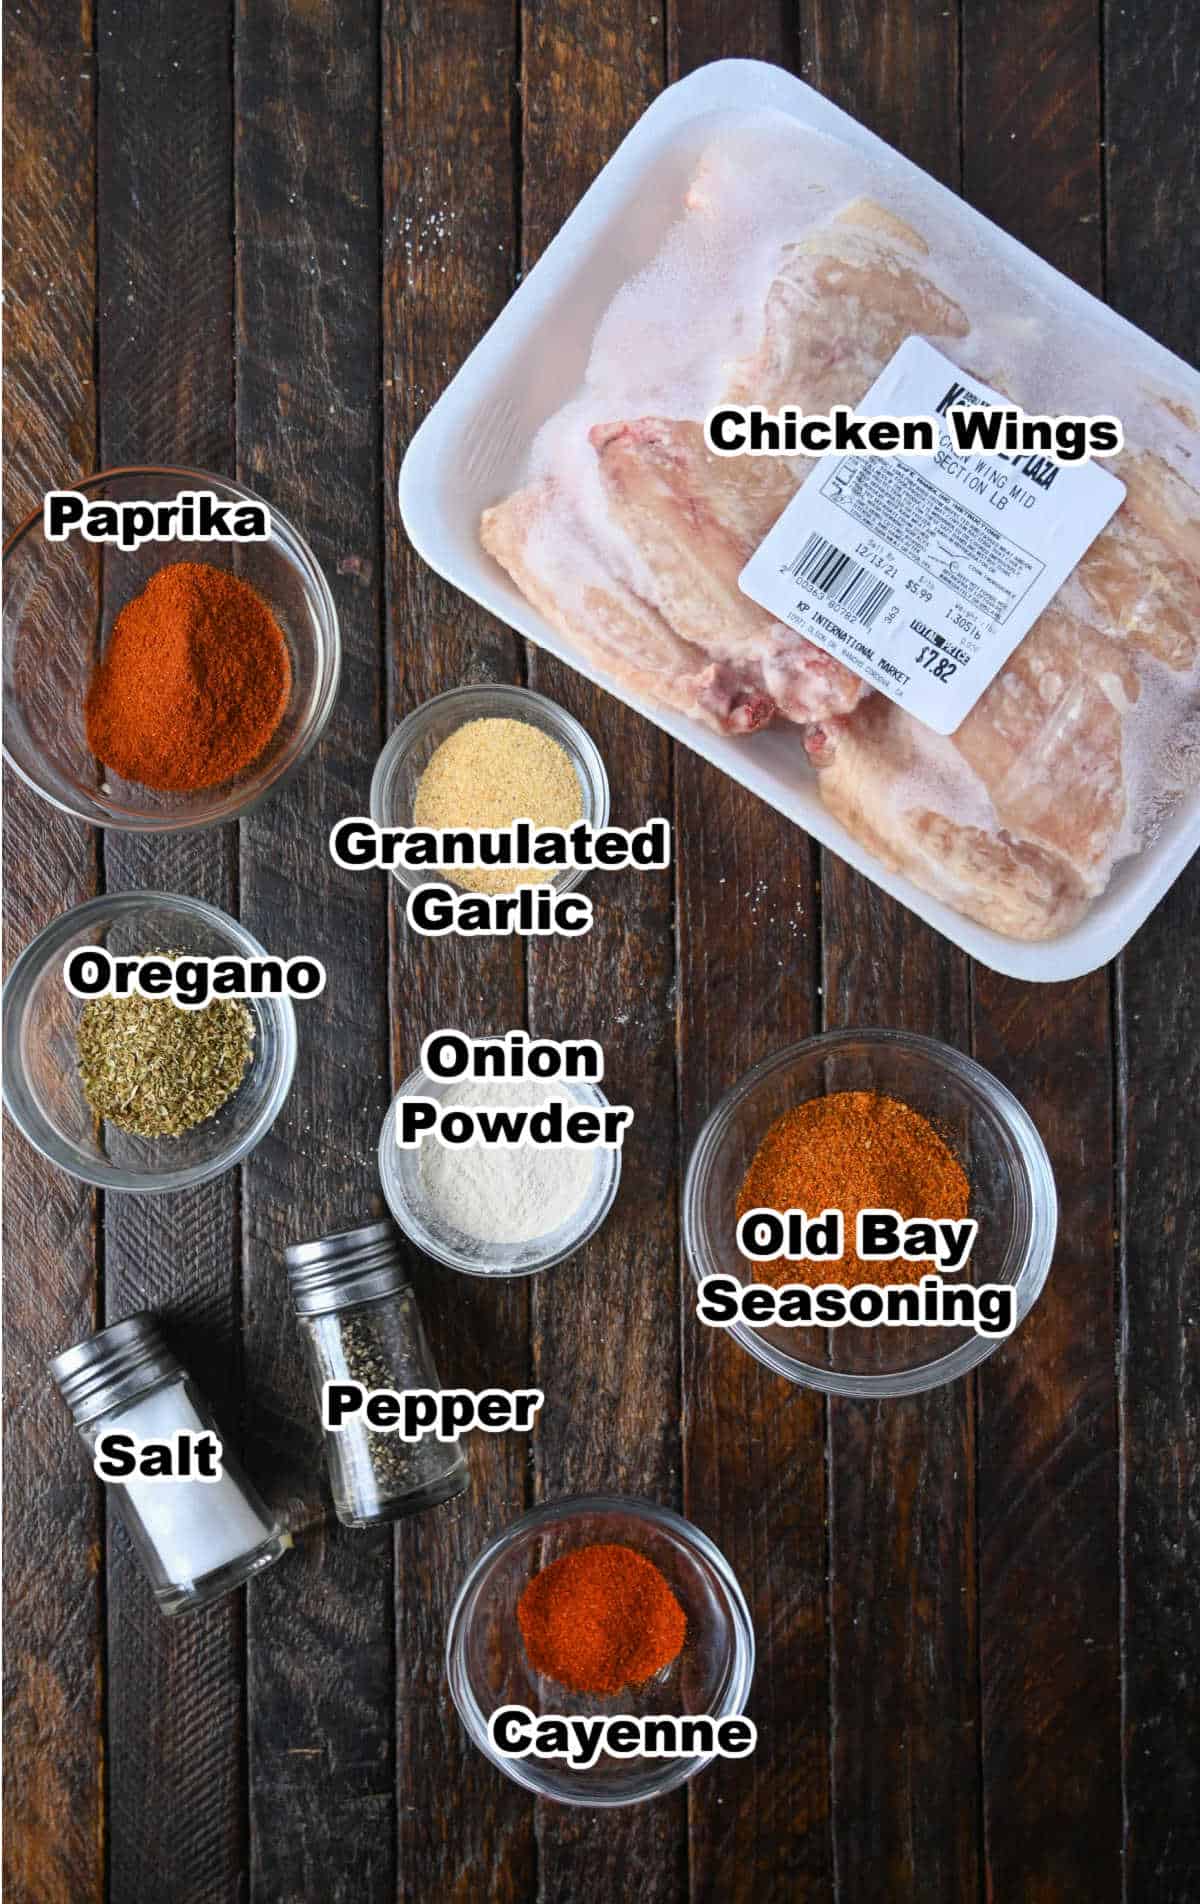 all ingredients needed for chicken wings.